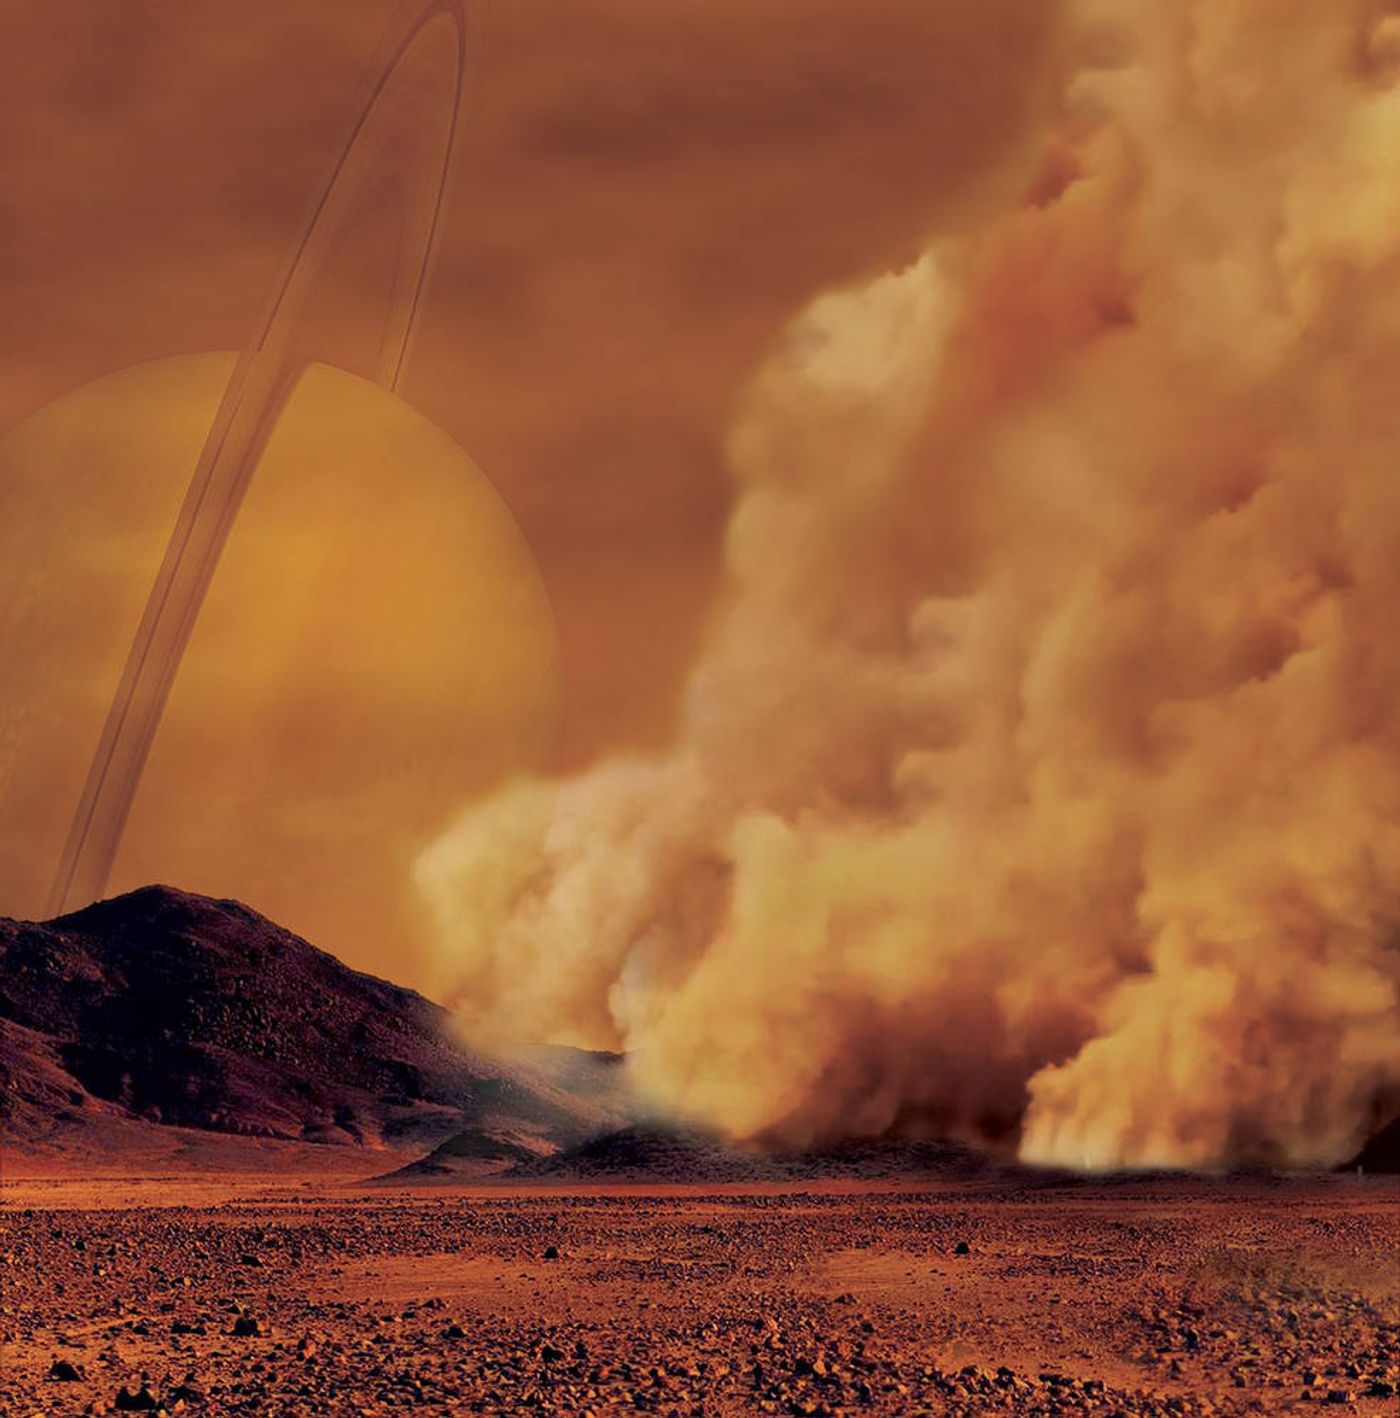 An artist's impression of an atmospheric dust storm occurring on Saturn's moon Titan.